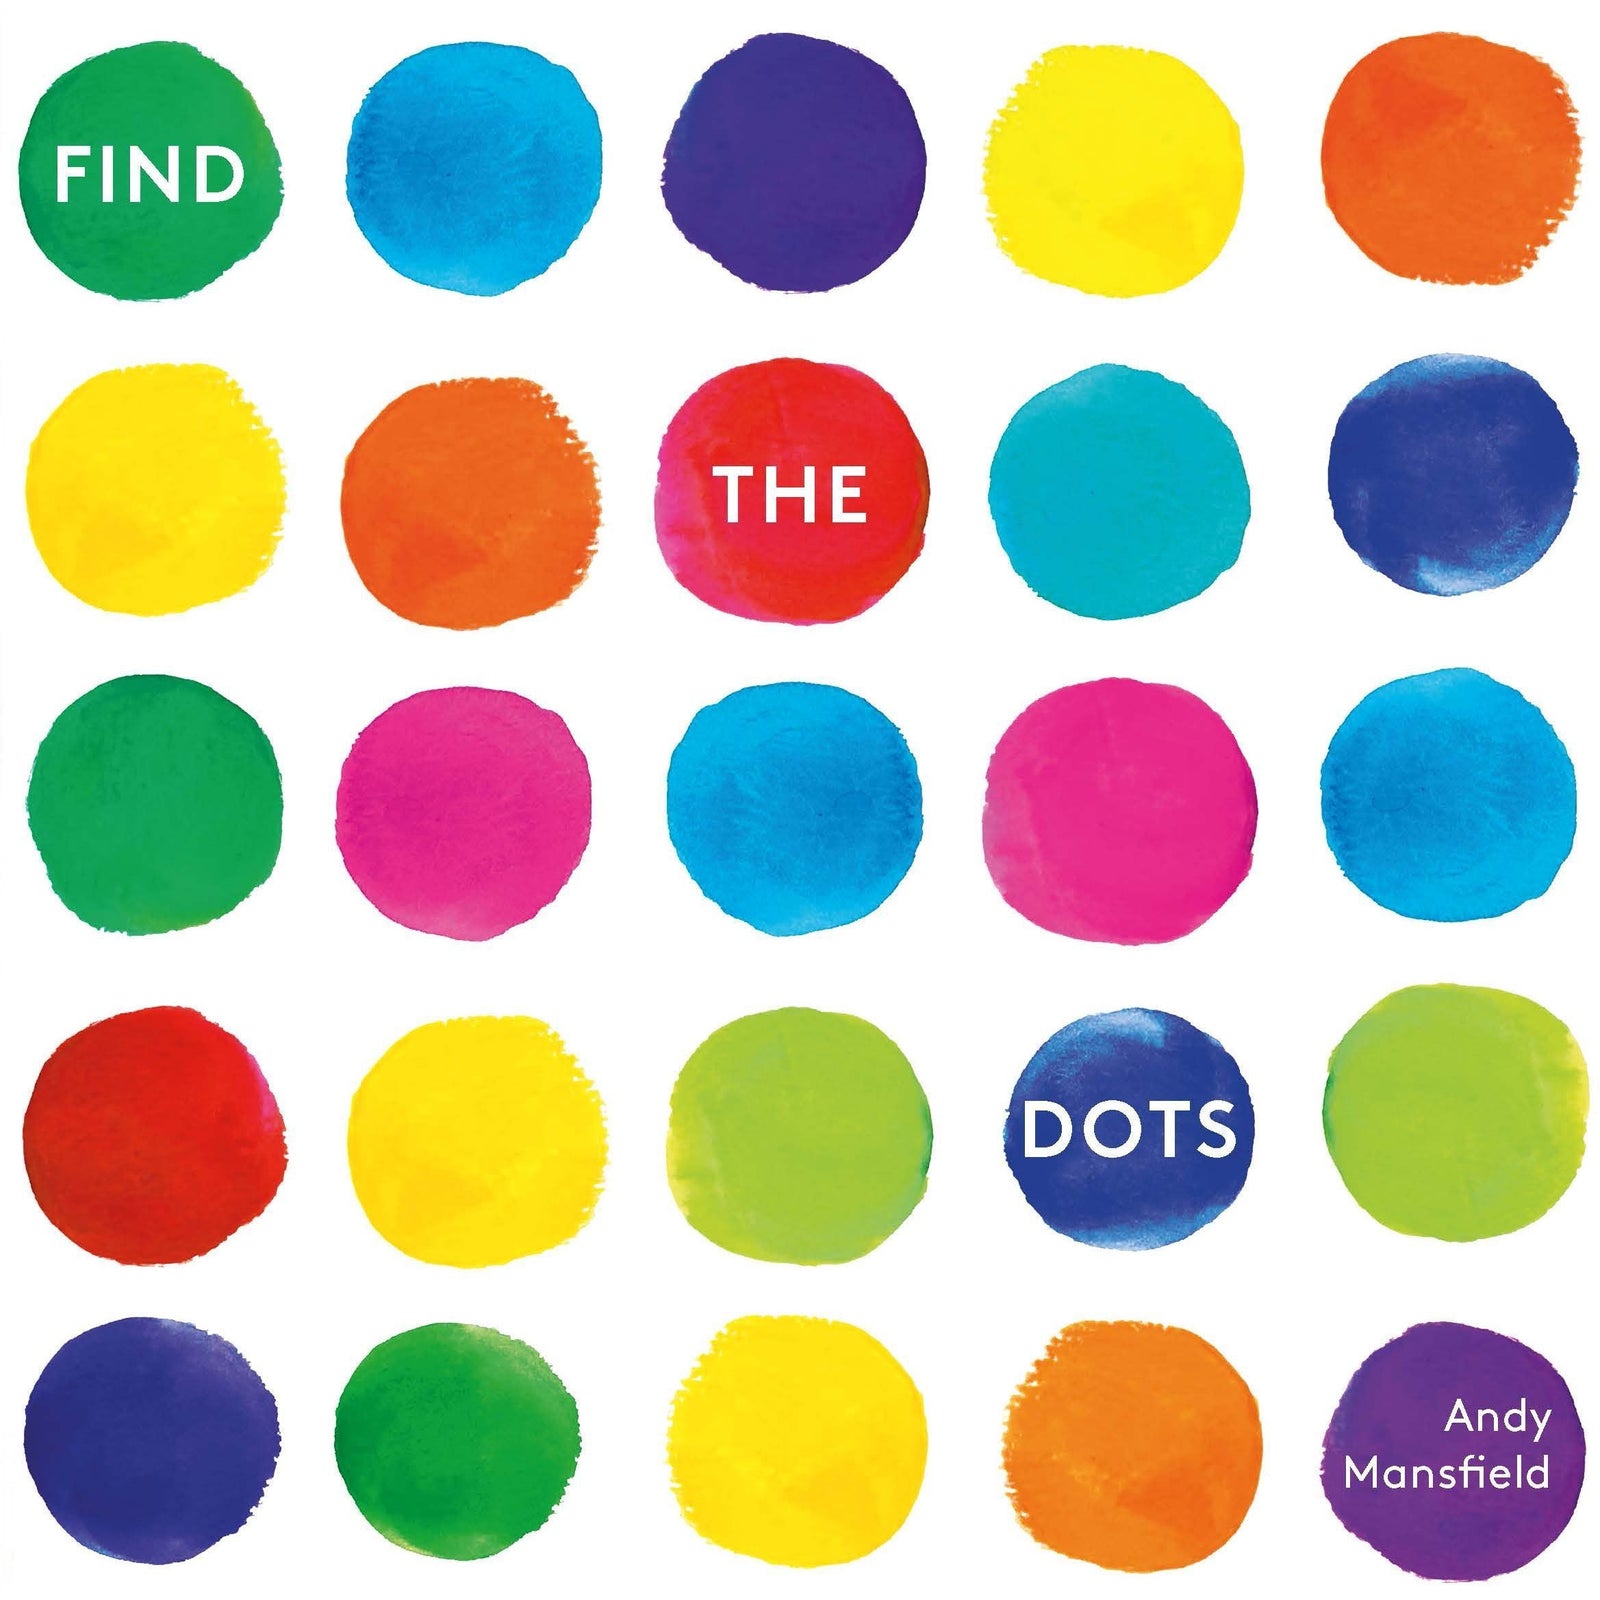 Find the Dots